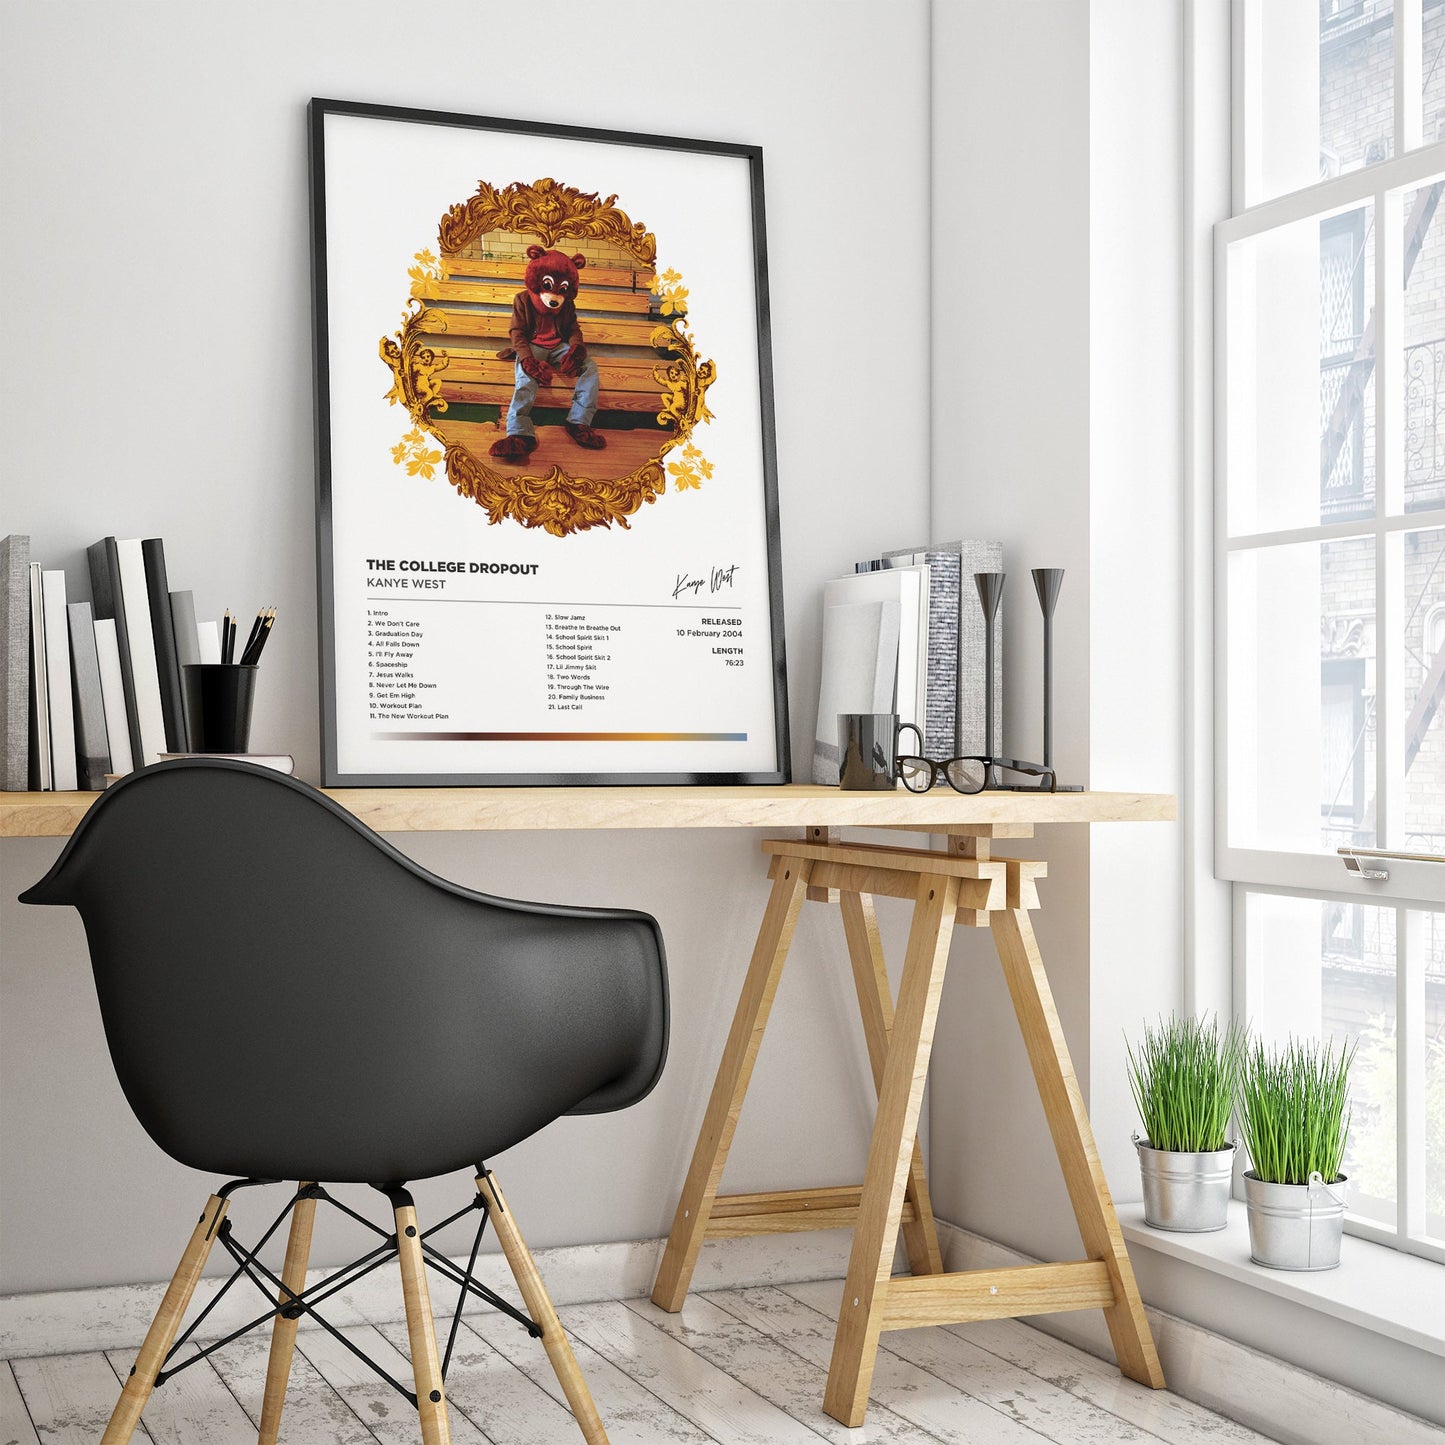 Kanye West - College Dropout Framed Poster Print | Polaroid Style | Album Cover Artwork